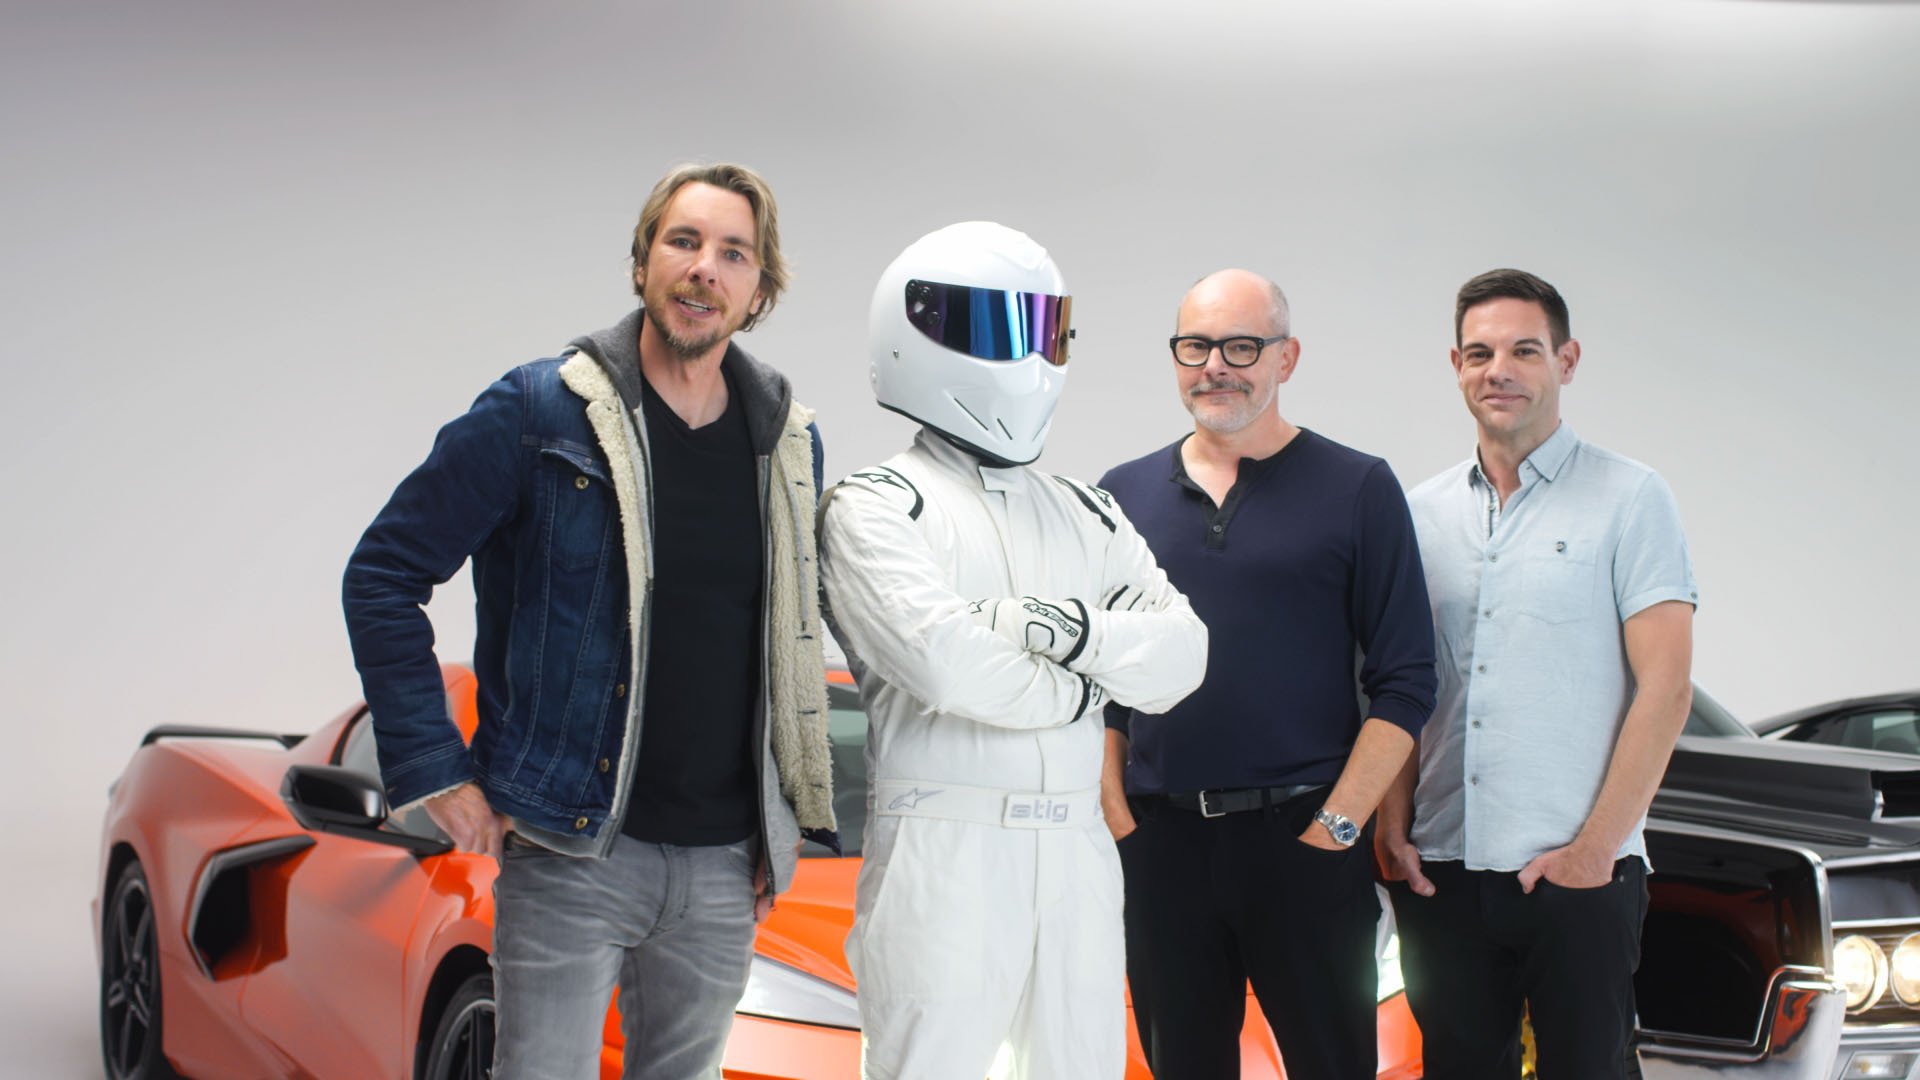 Top Gear America Show - Full Episodes on Demand - MotorTrend